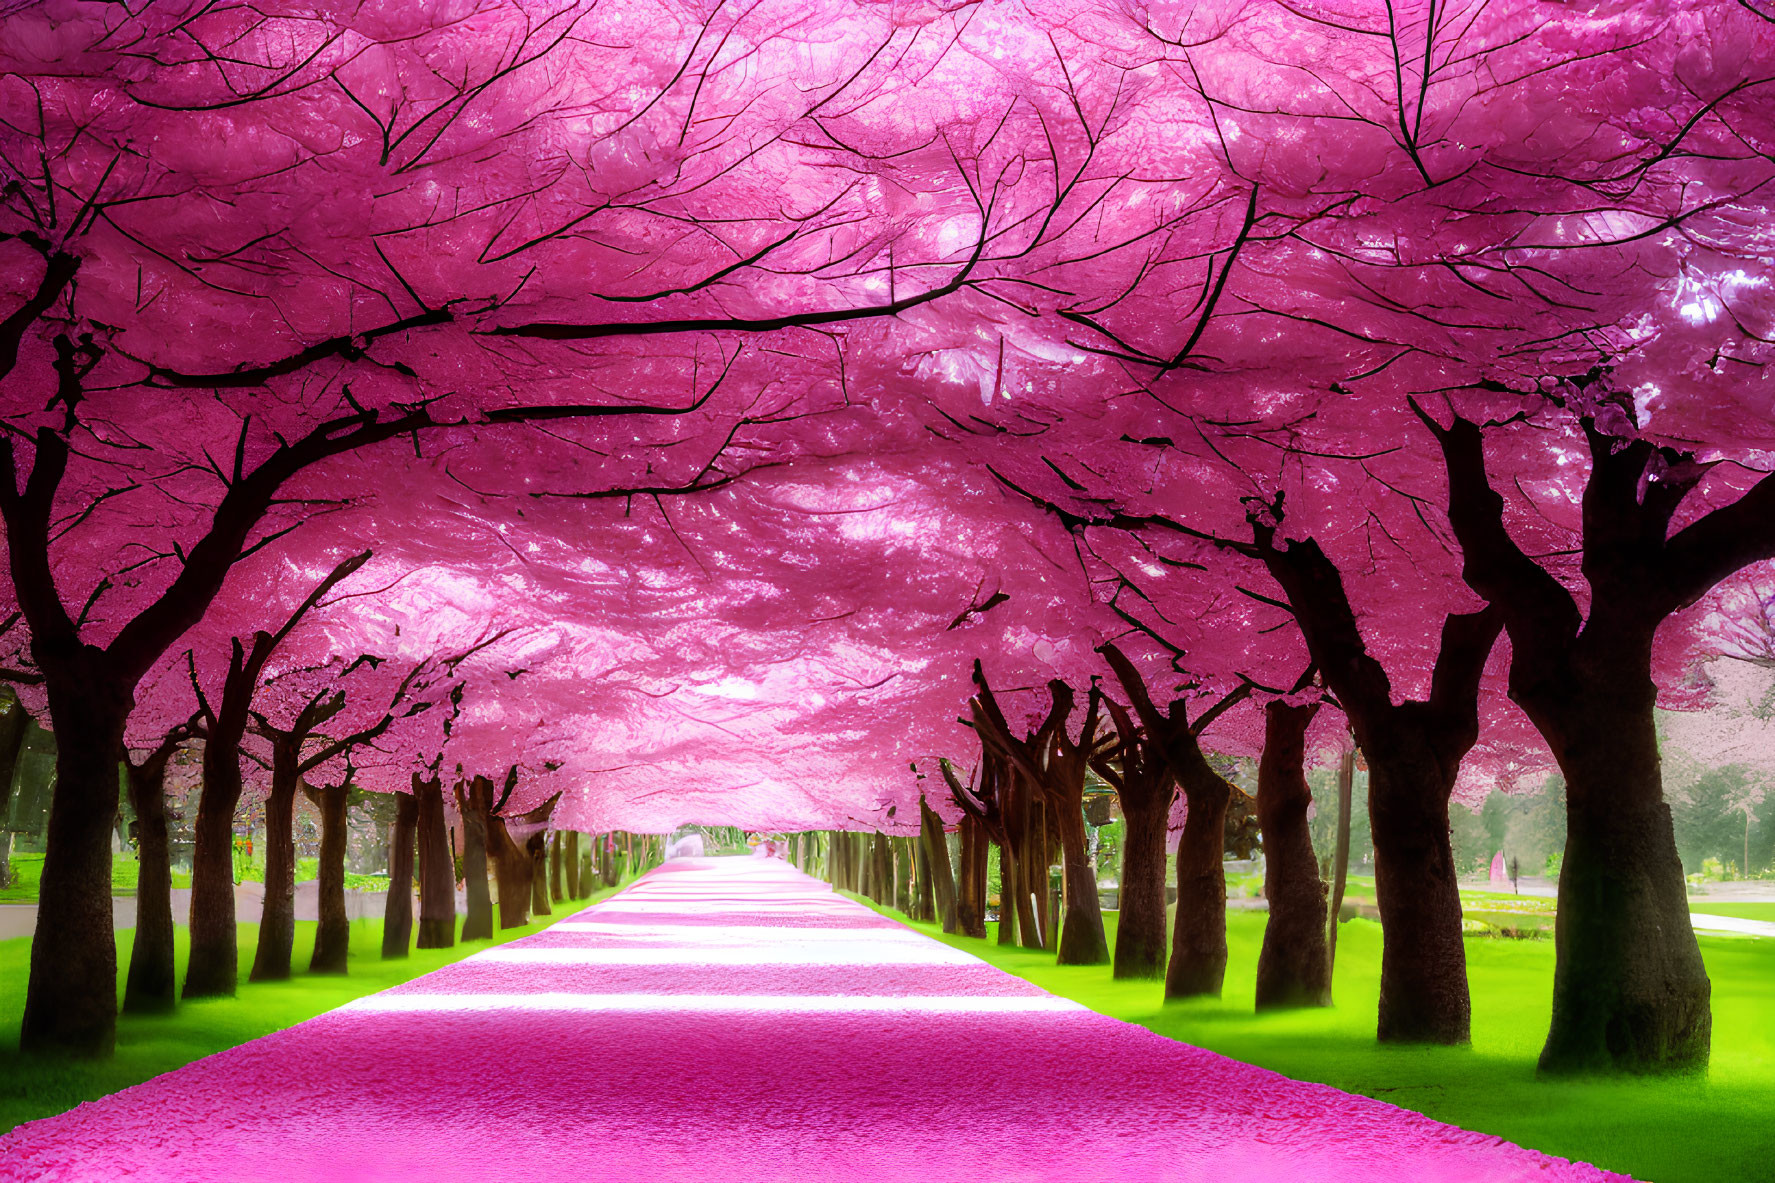 Pink Cherry Blossom Trees Create Vibrant Canopy Over Path